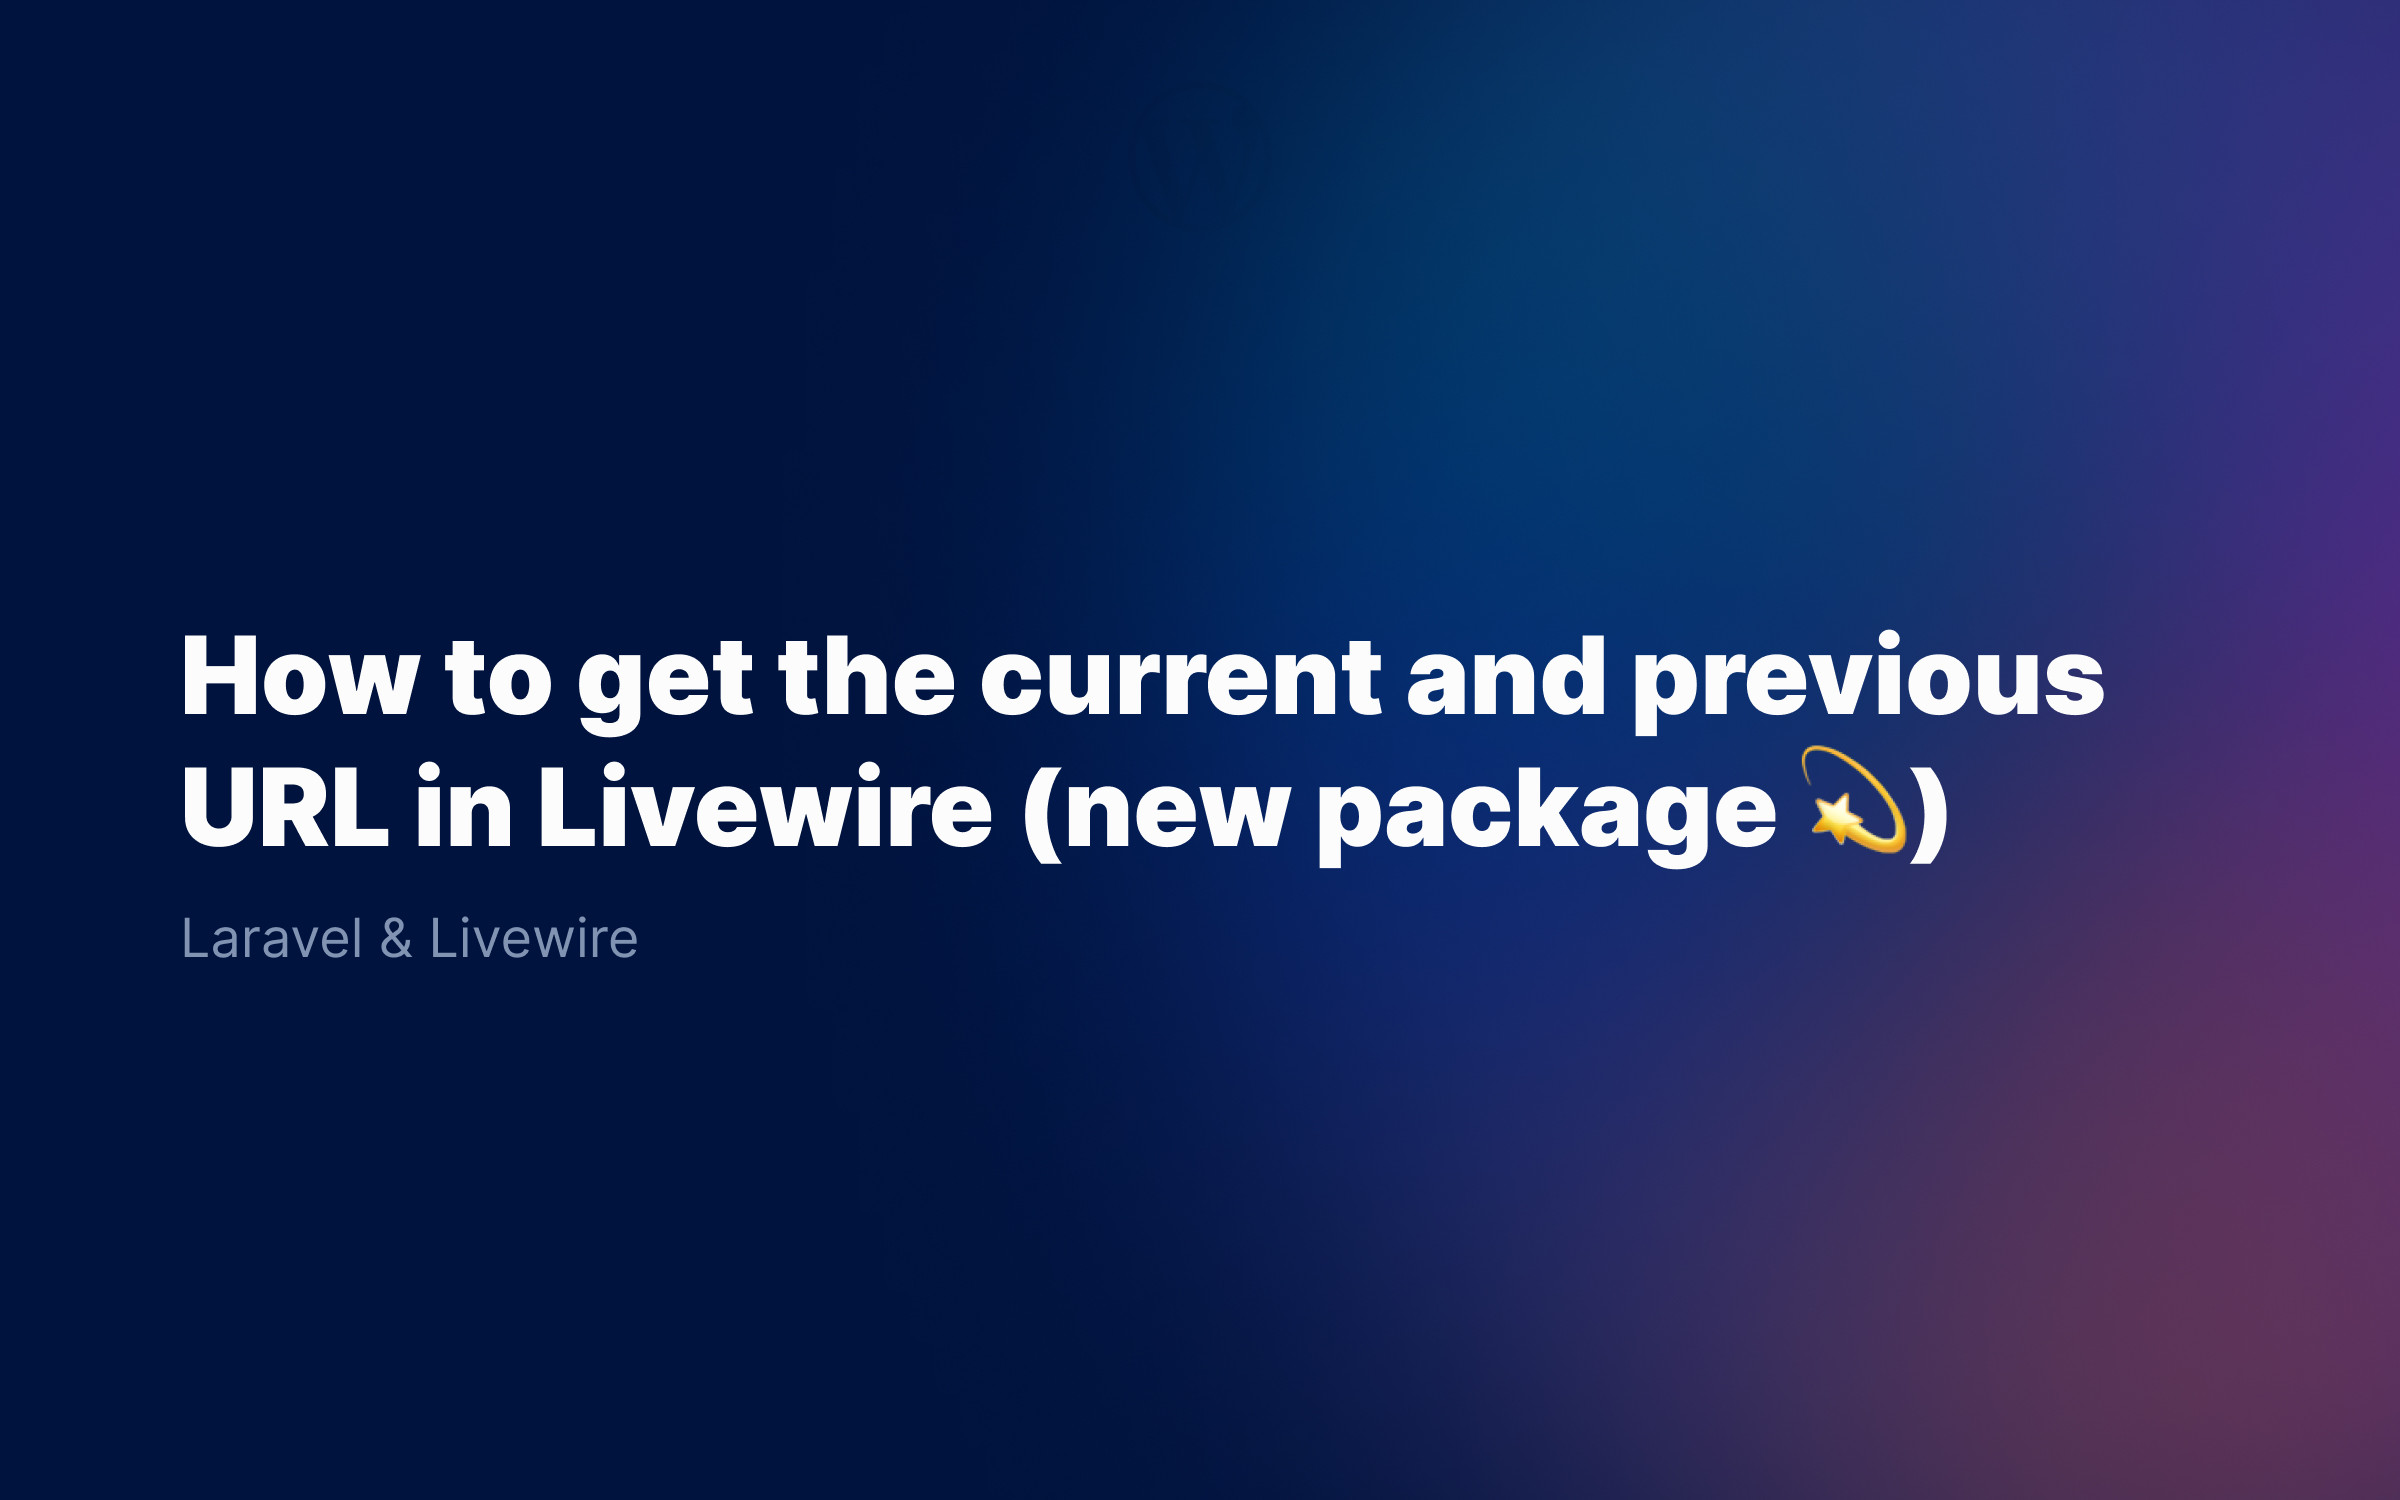 How to get the current and previous URL in Livewire (new package 💫)